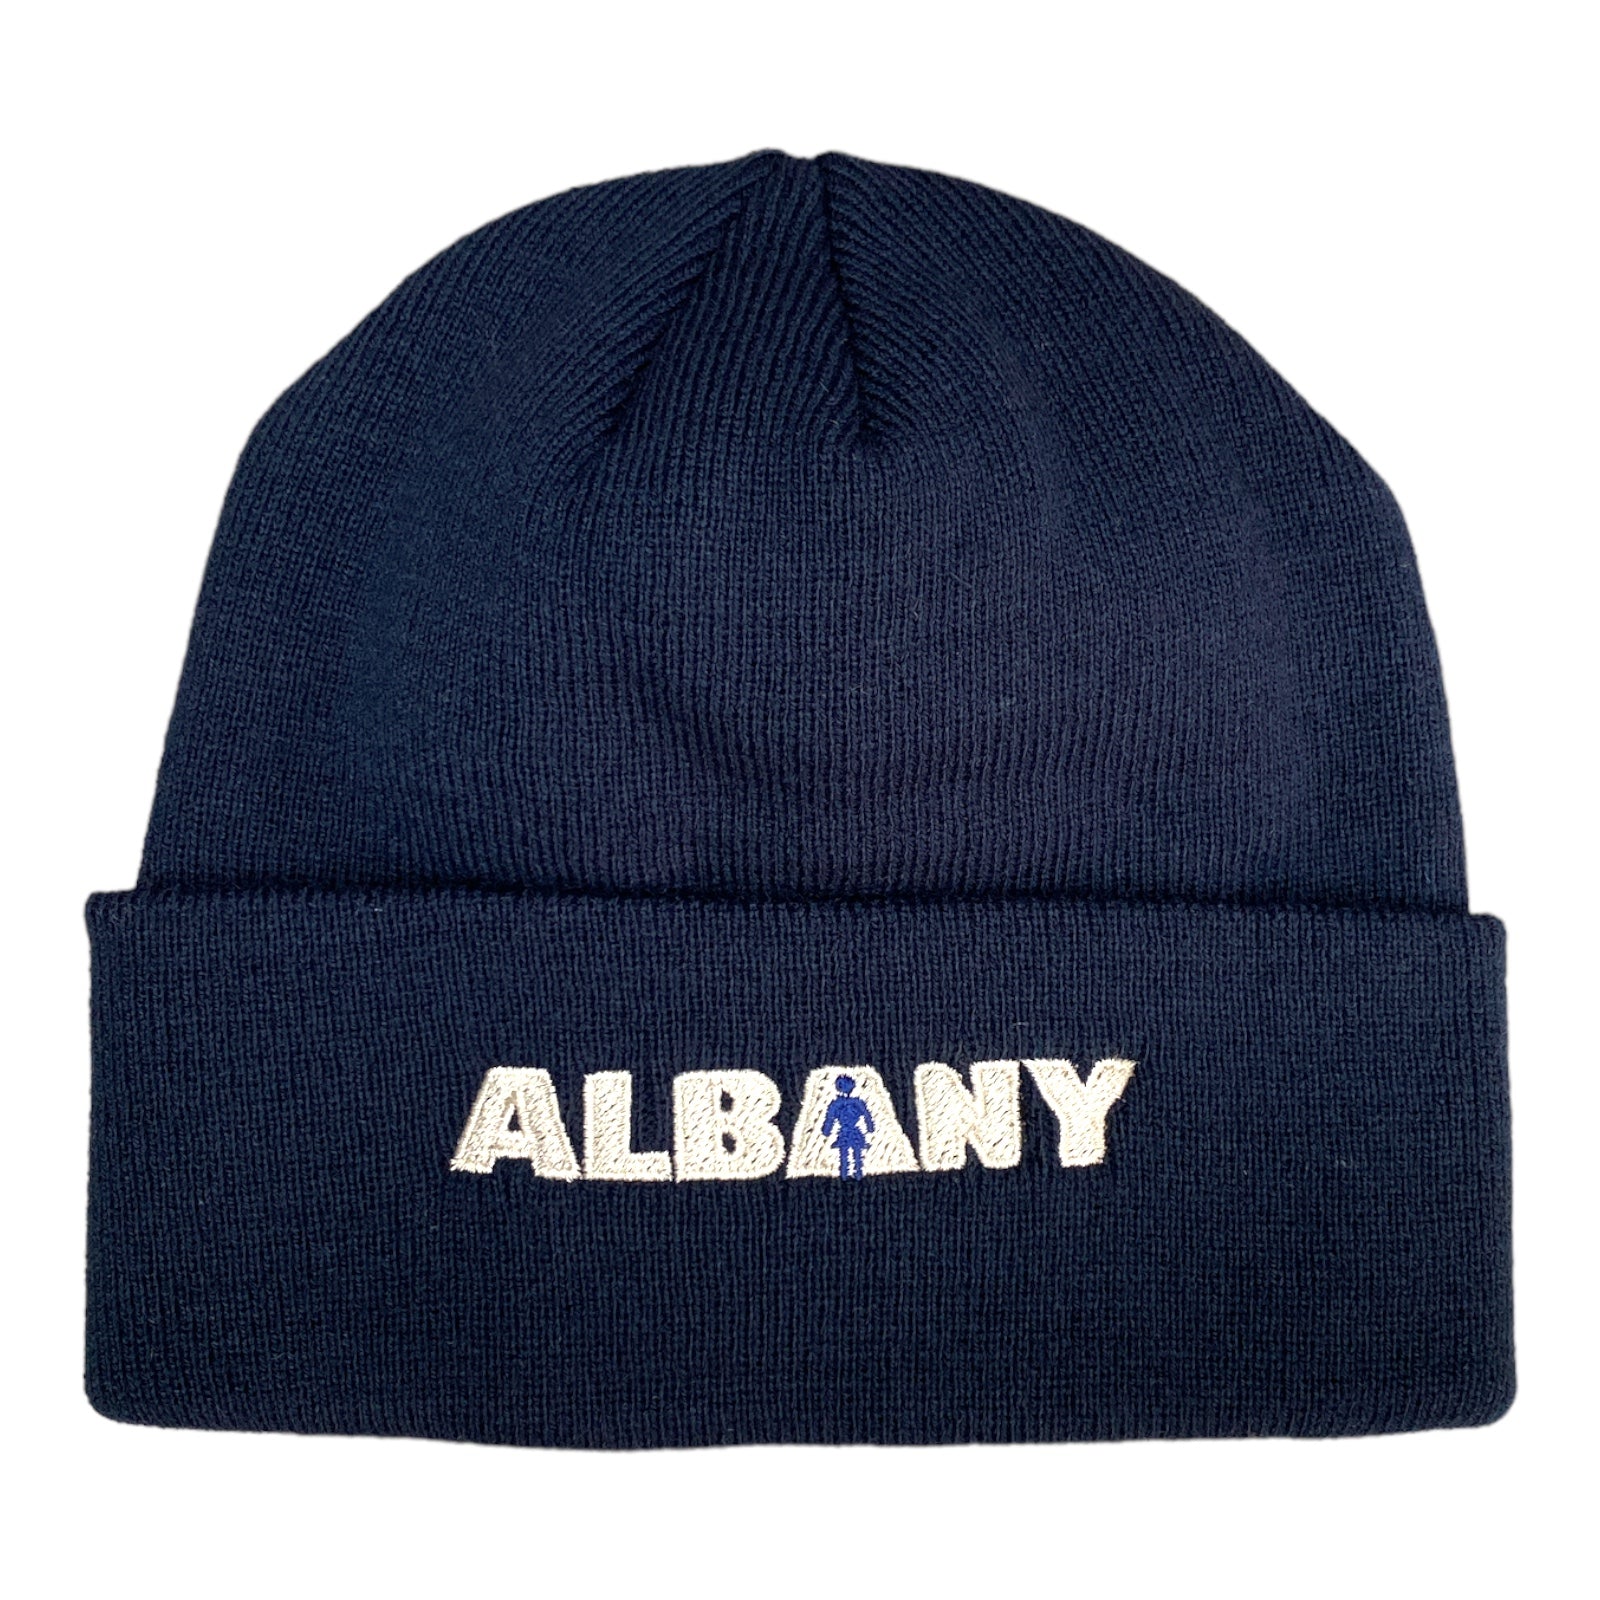 Navy Cuff Beanie with Albany Embroidered.